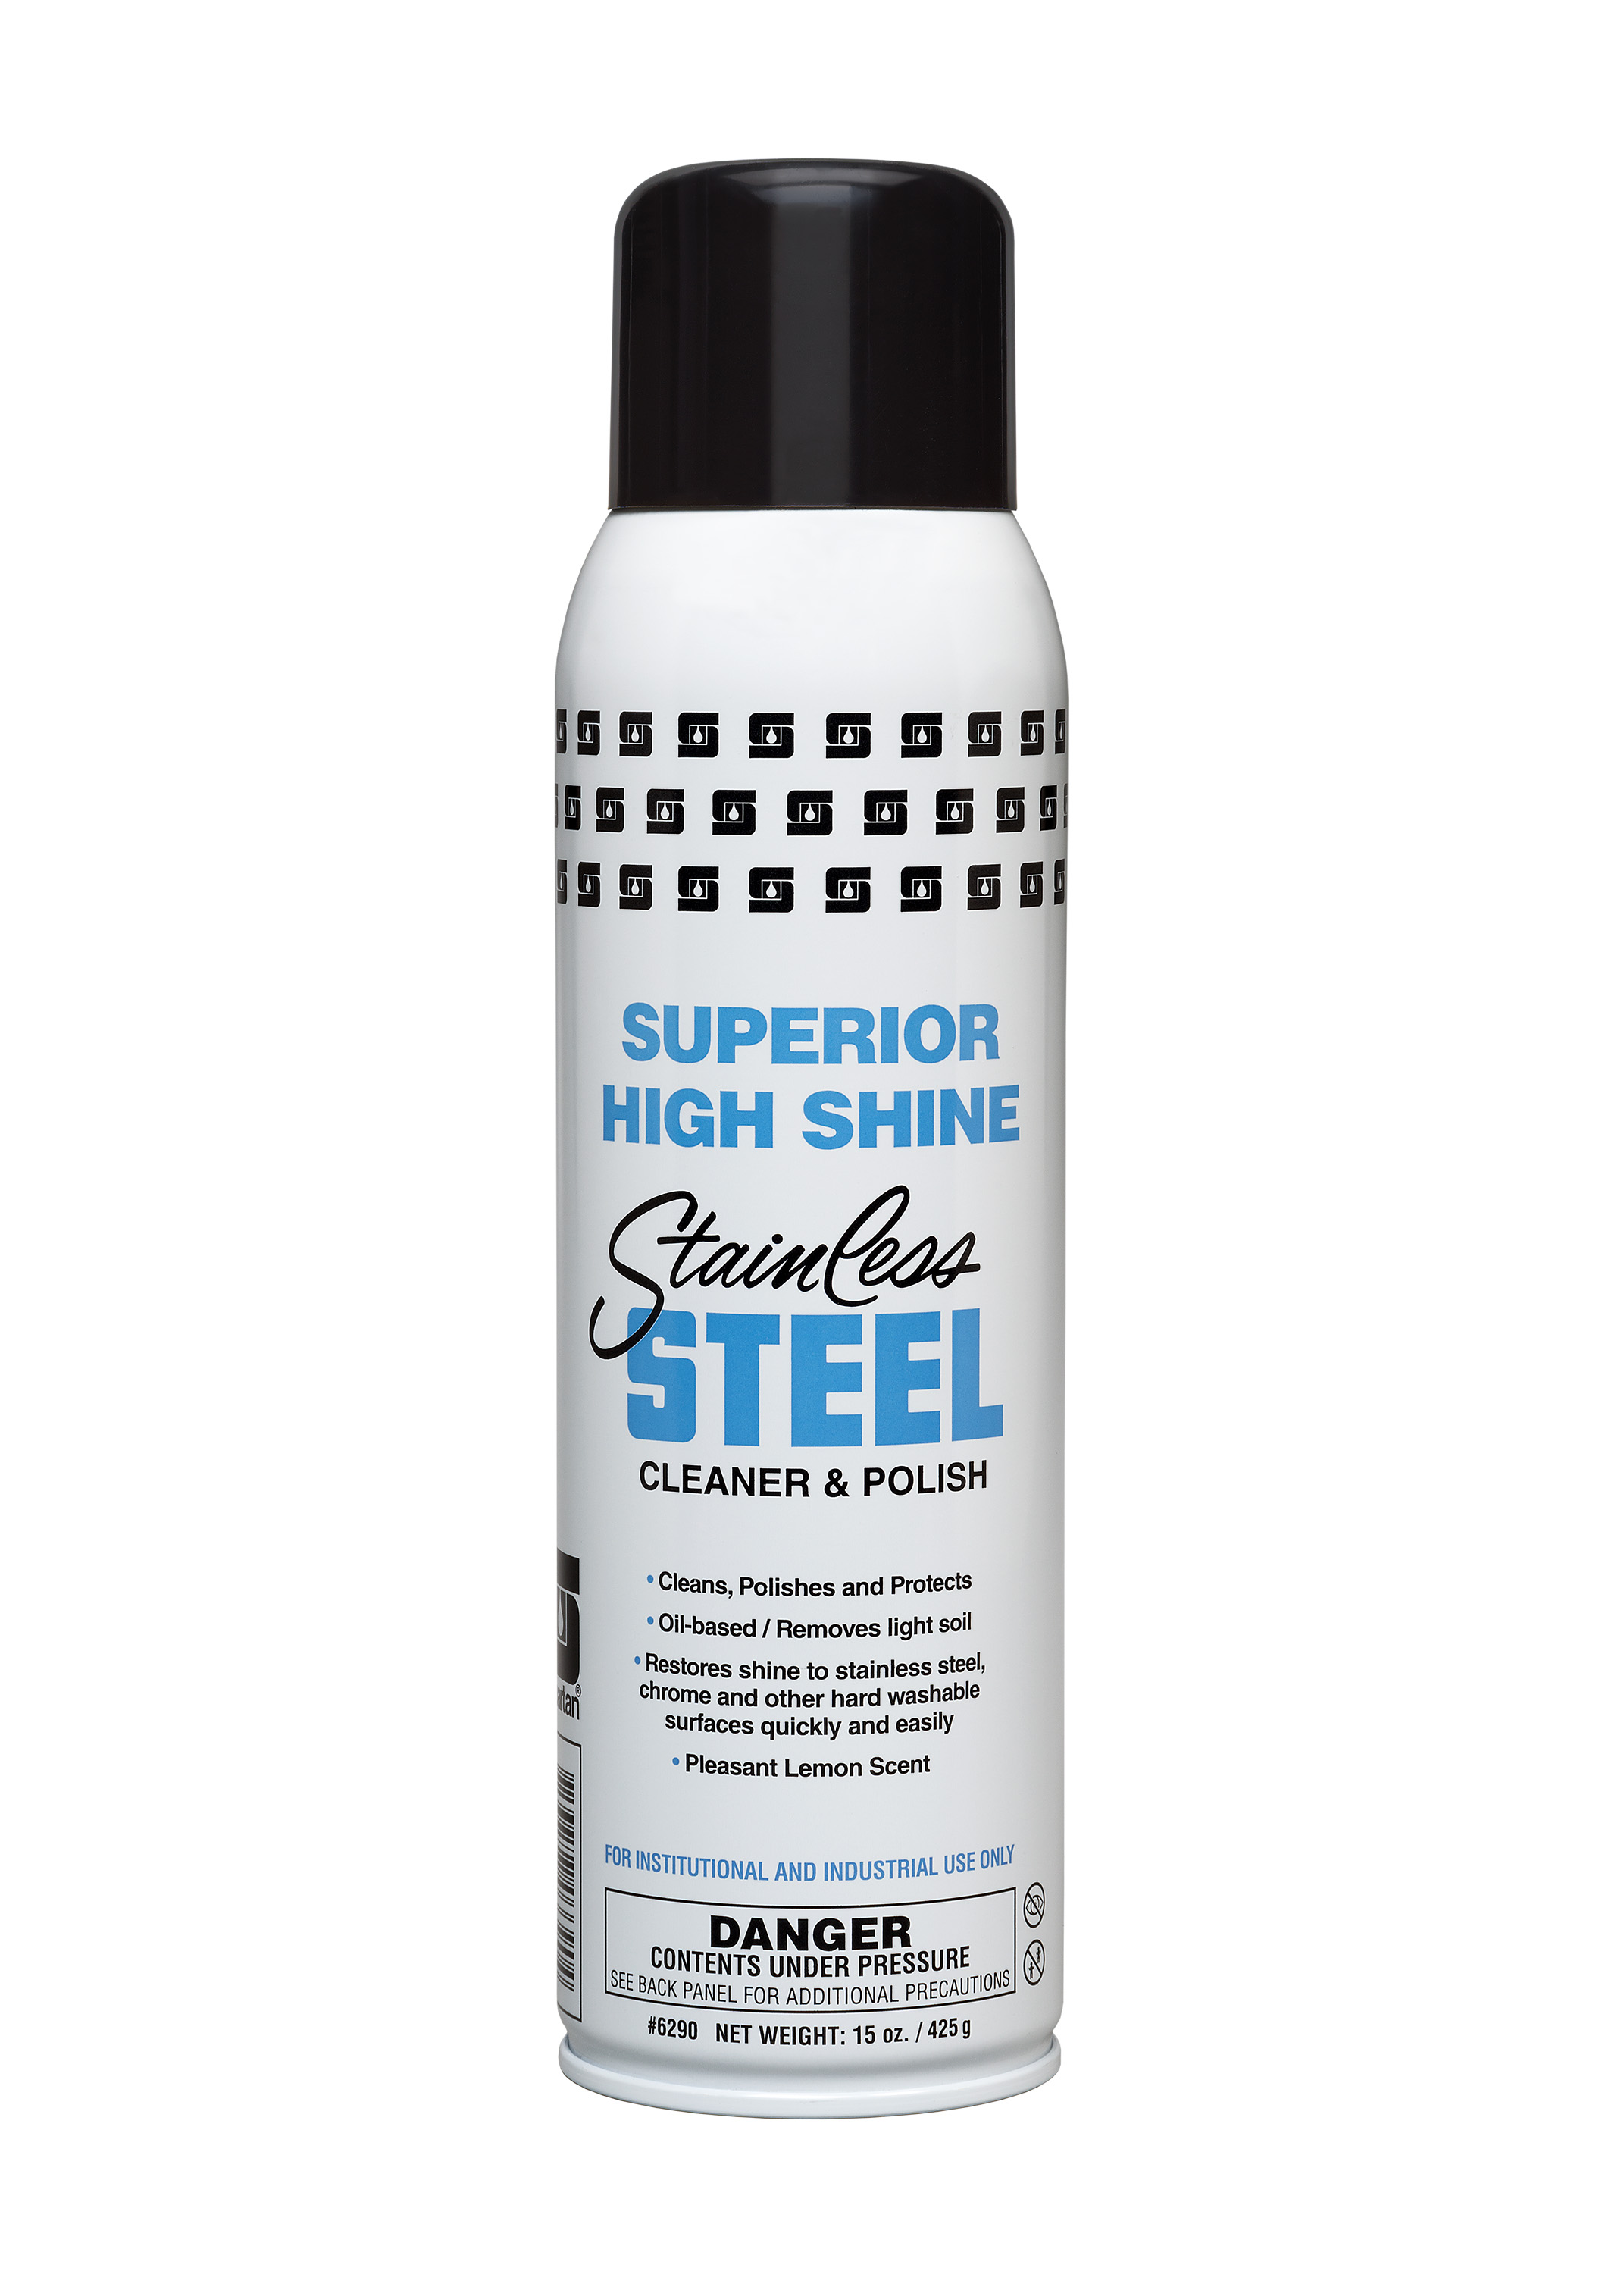 SUPERIOR HIGH SHINE OIL BASE STAINLESS STEEL CLEANER